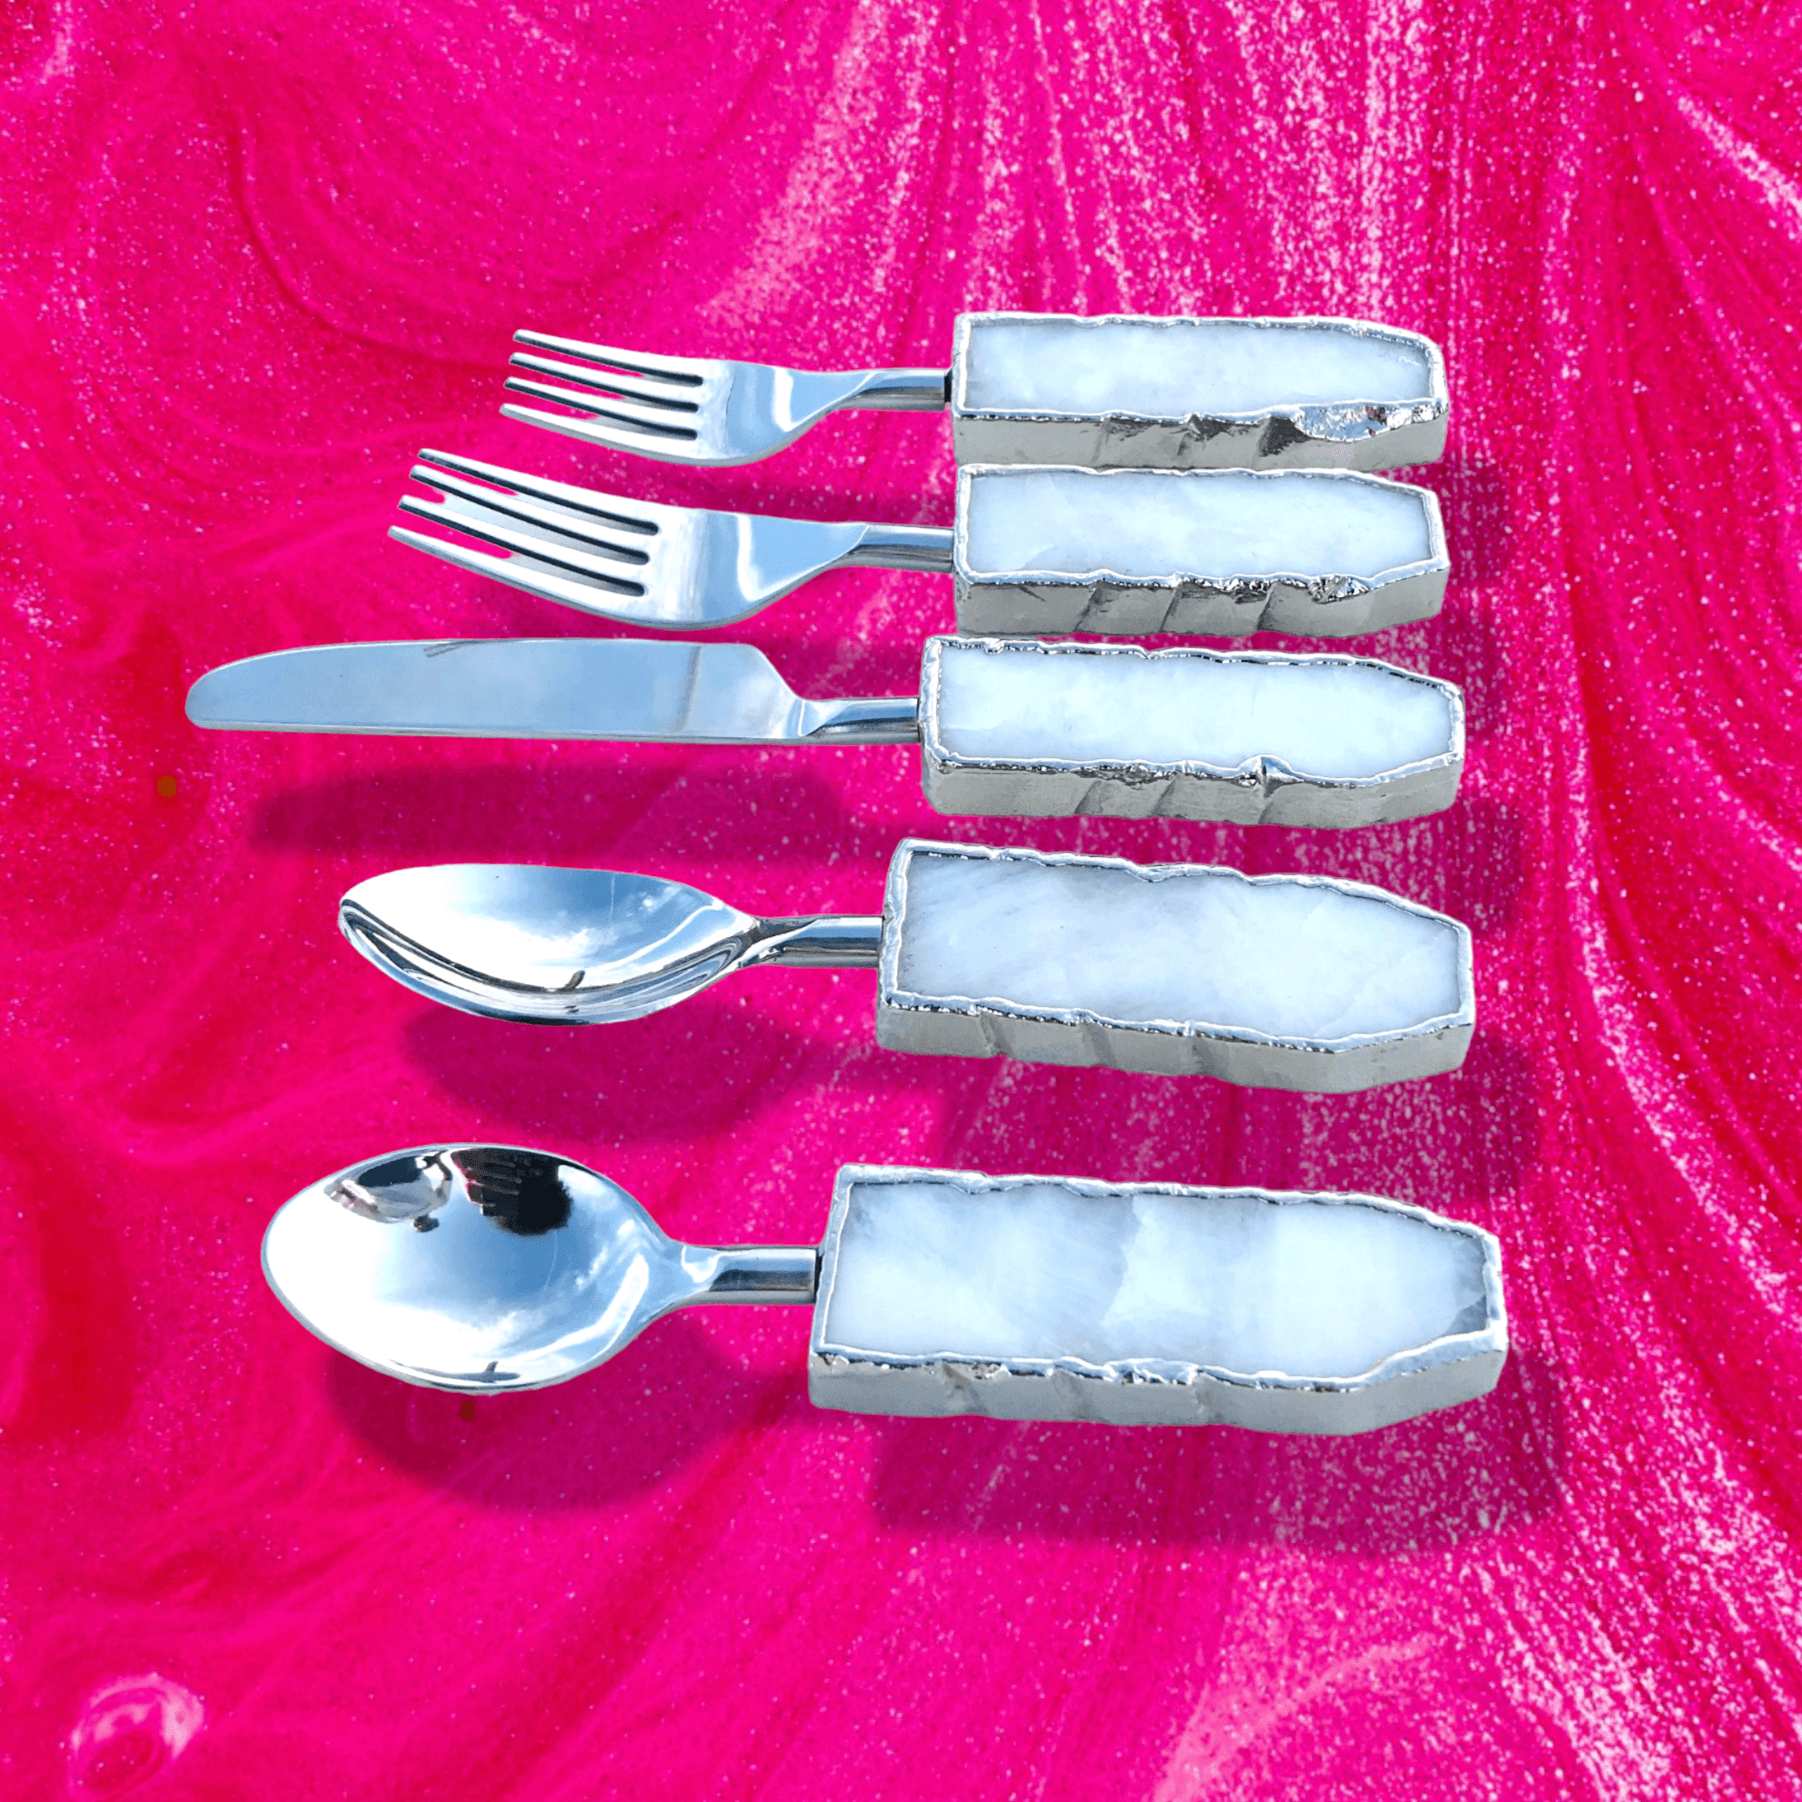 Set of 5 Pieces White Agate Cutlery - MAIA HOMES